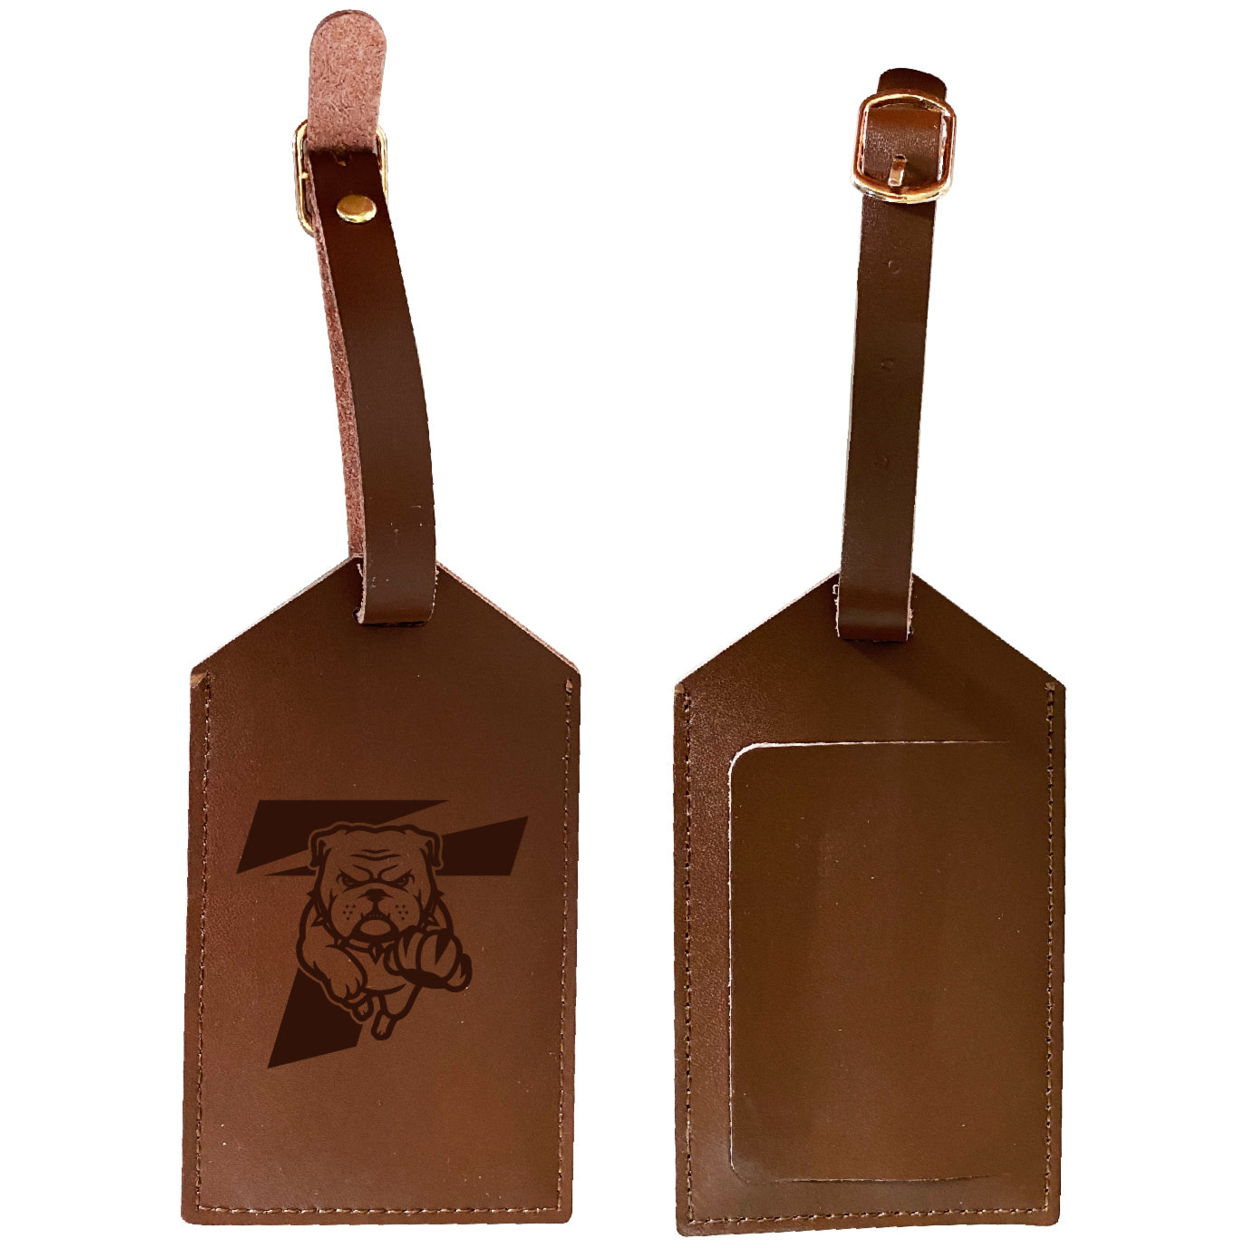 Truman State University Leather Luggage Tag Engraved